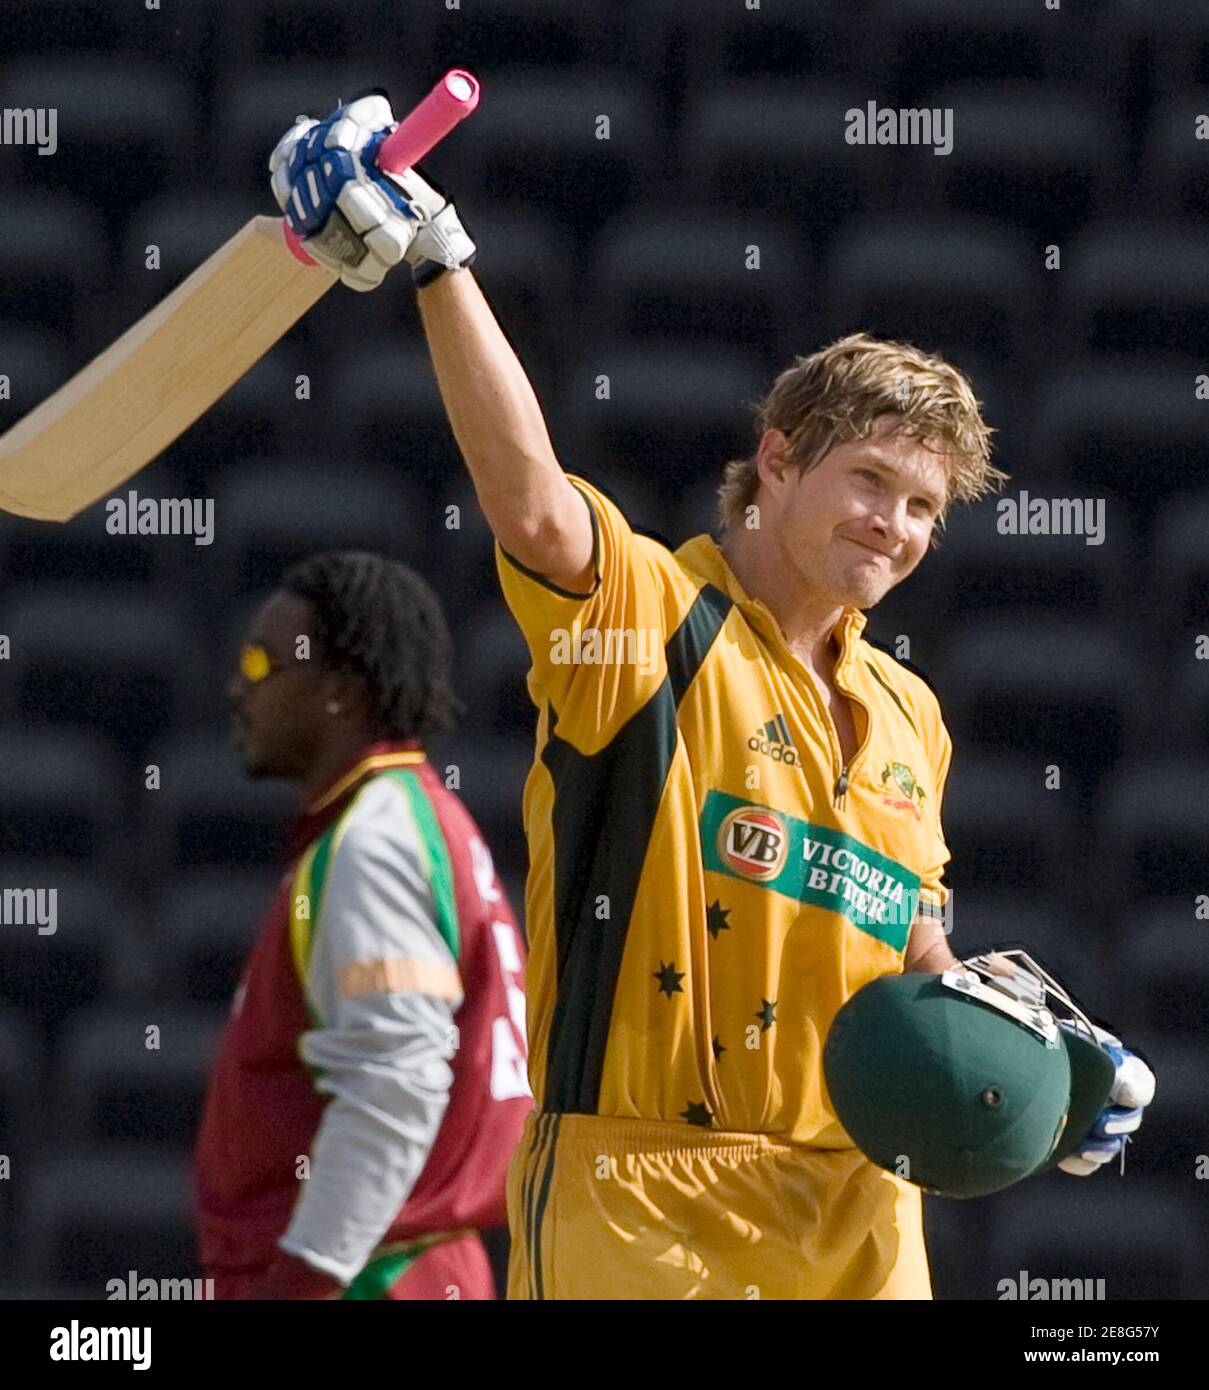 Australia's Shane Watson celebrates his century during their third one-day cricket international against West Indies in St. George's, Grenada June 29, 2008.       REUTERS/Andy Clark        (GRENADA) Stock Photo